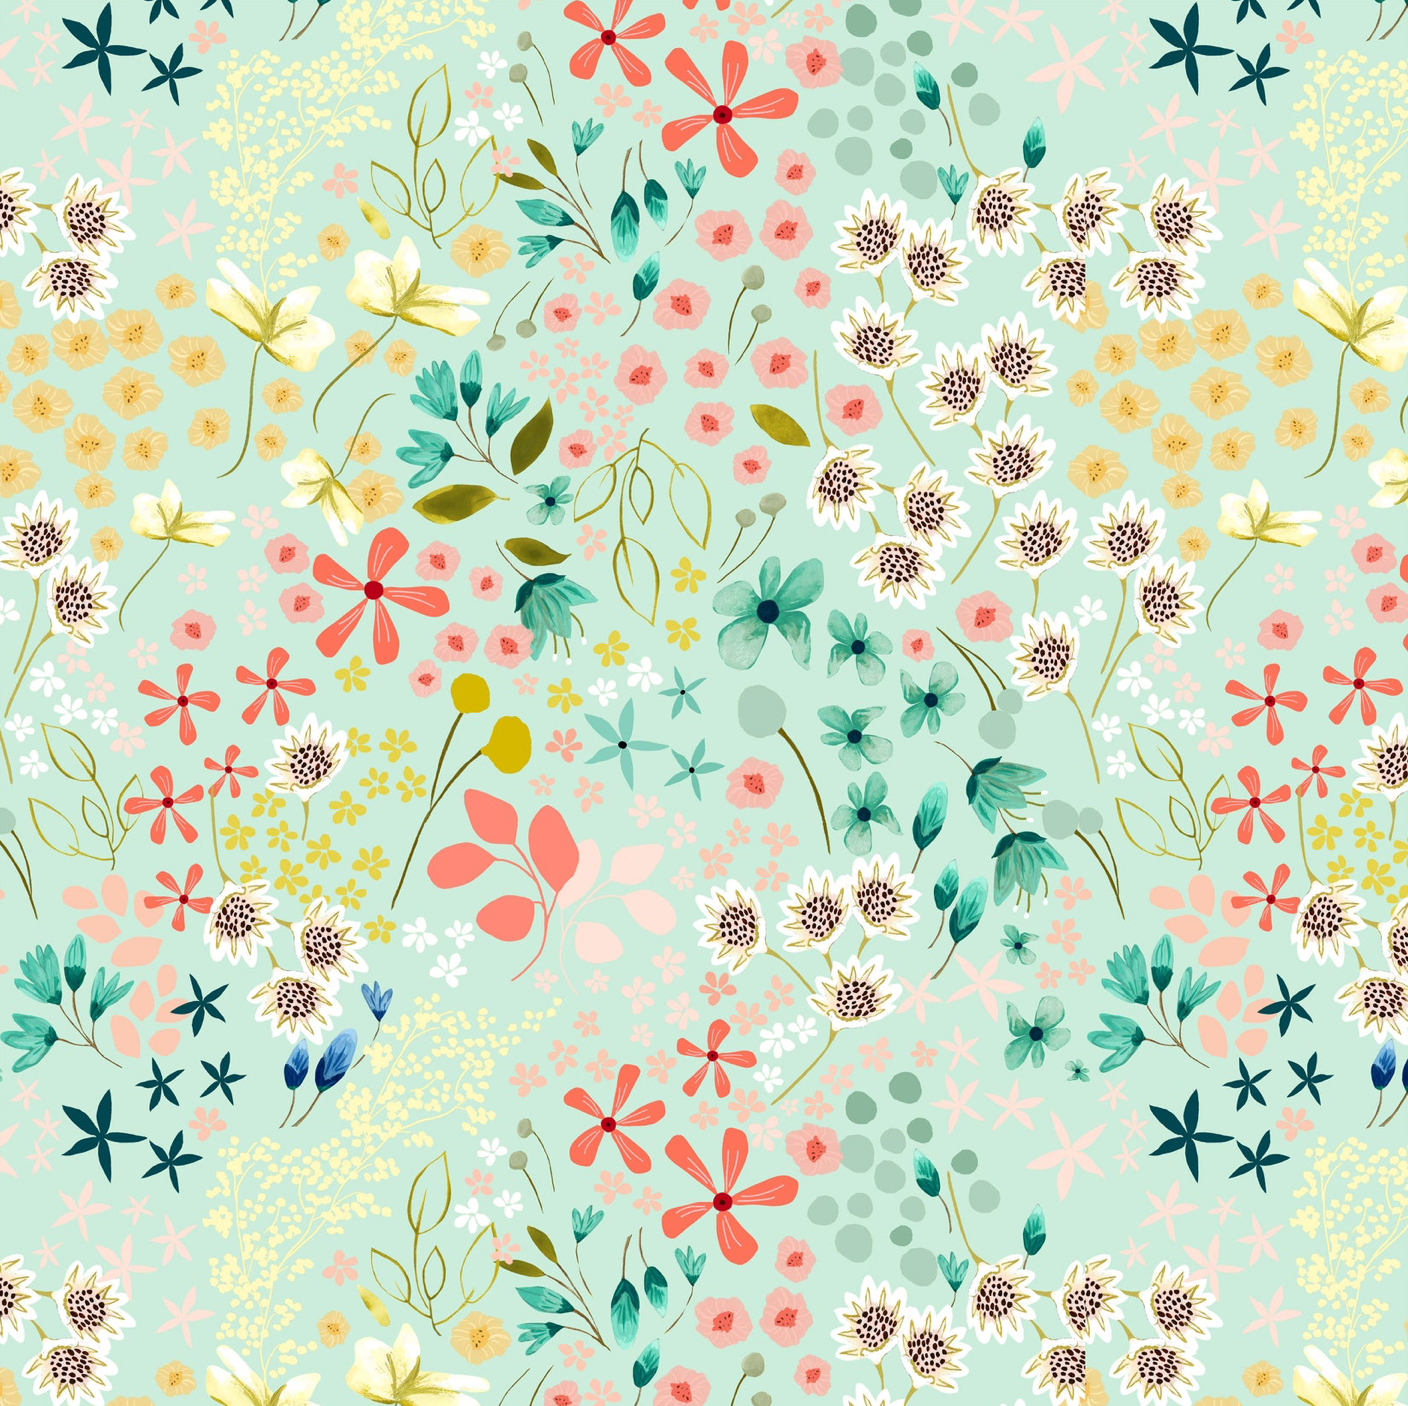 Serenity Blooms, Meadow Dream Mint, SR24511, sold by the 1/2 yard, *PREORDER